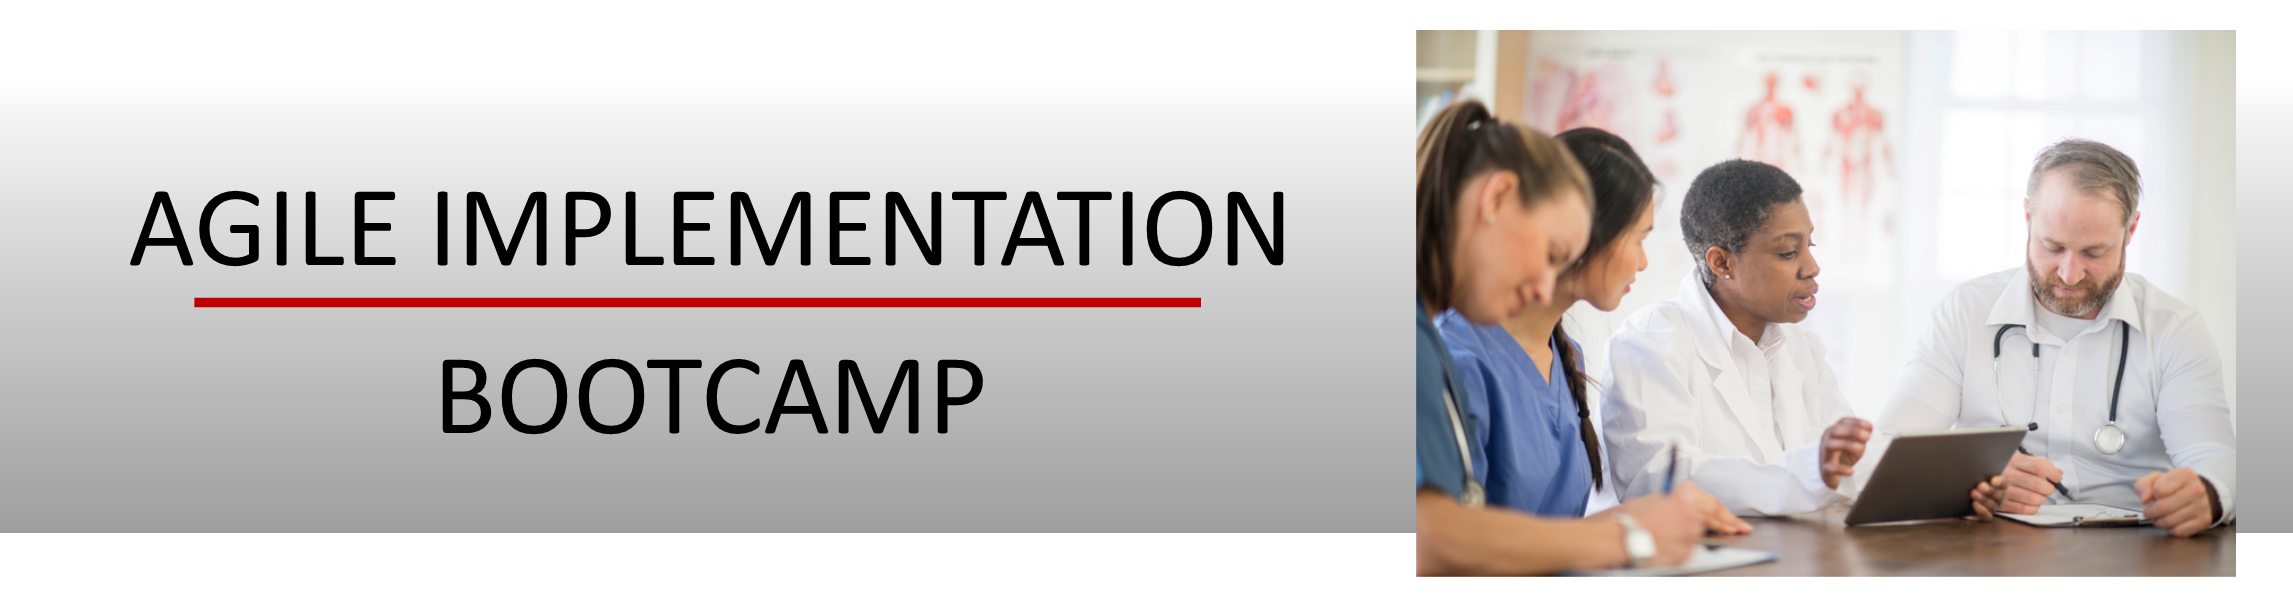 Agile Implementation Boot Camp Banner